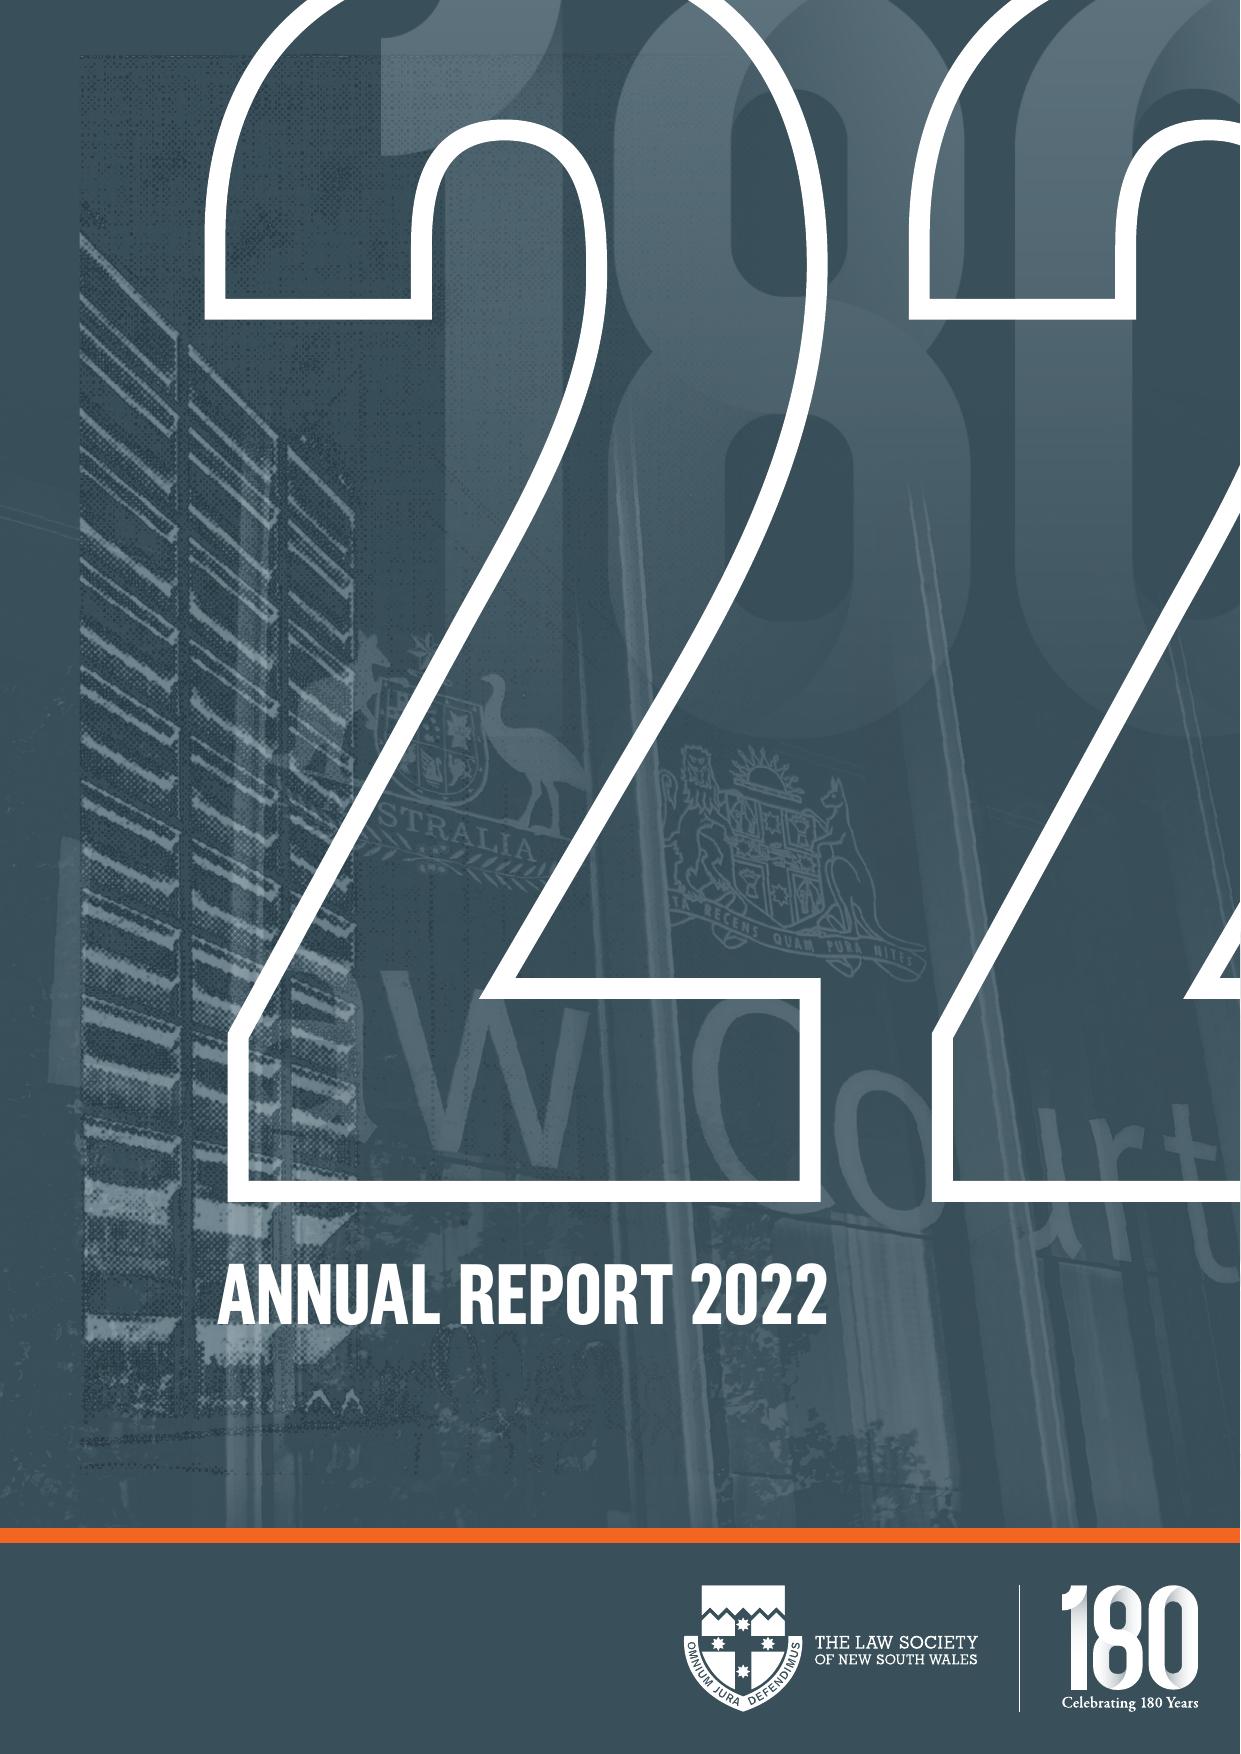 BAKER-LAW 2023 Annual Report